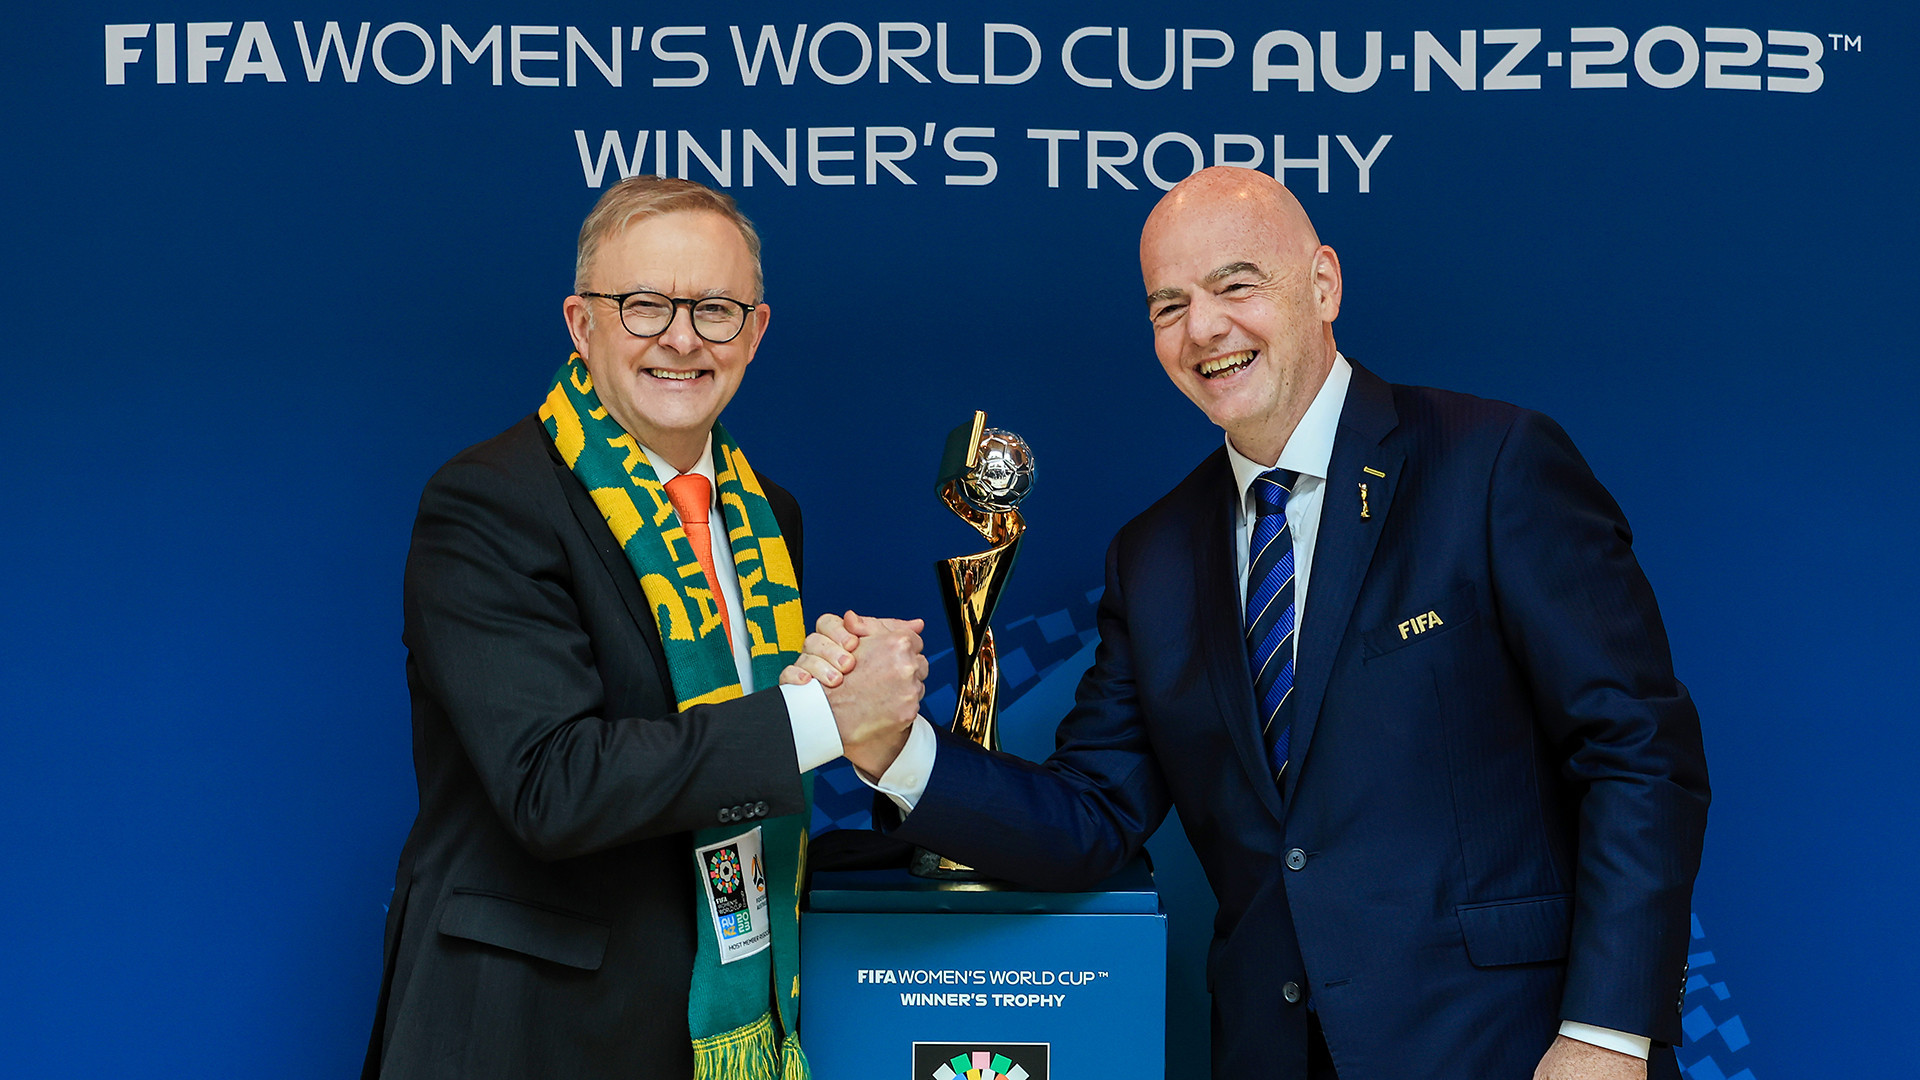 Infantino declares 2023 FIFA Women's World Cup is "best ever" even before group matches completed